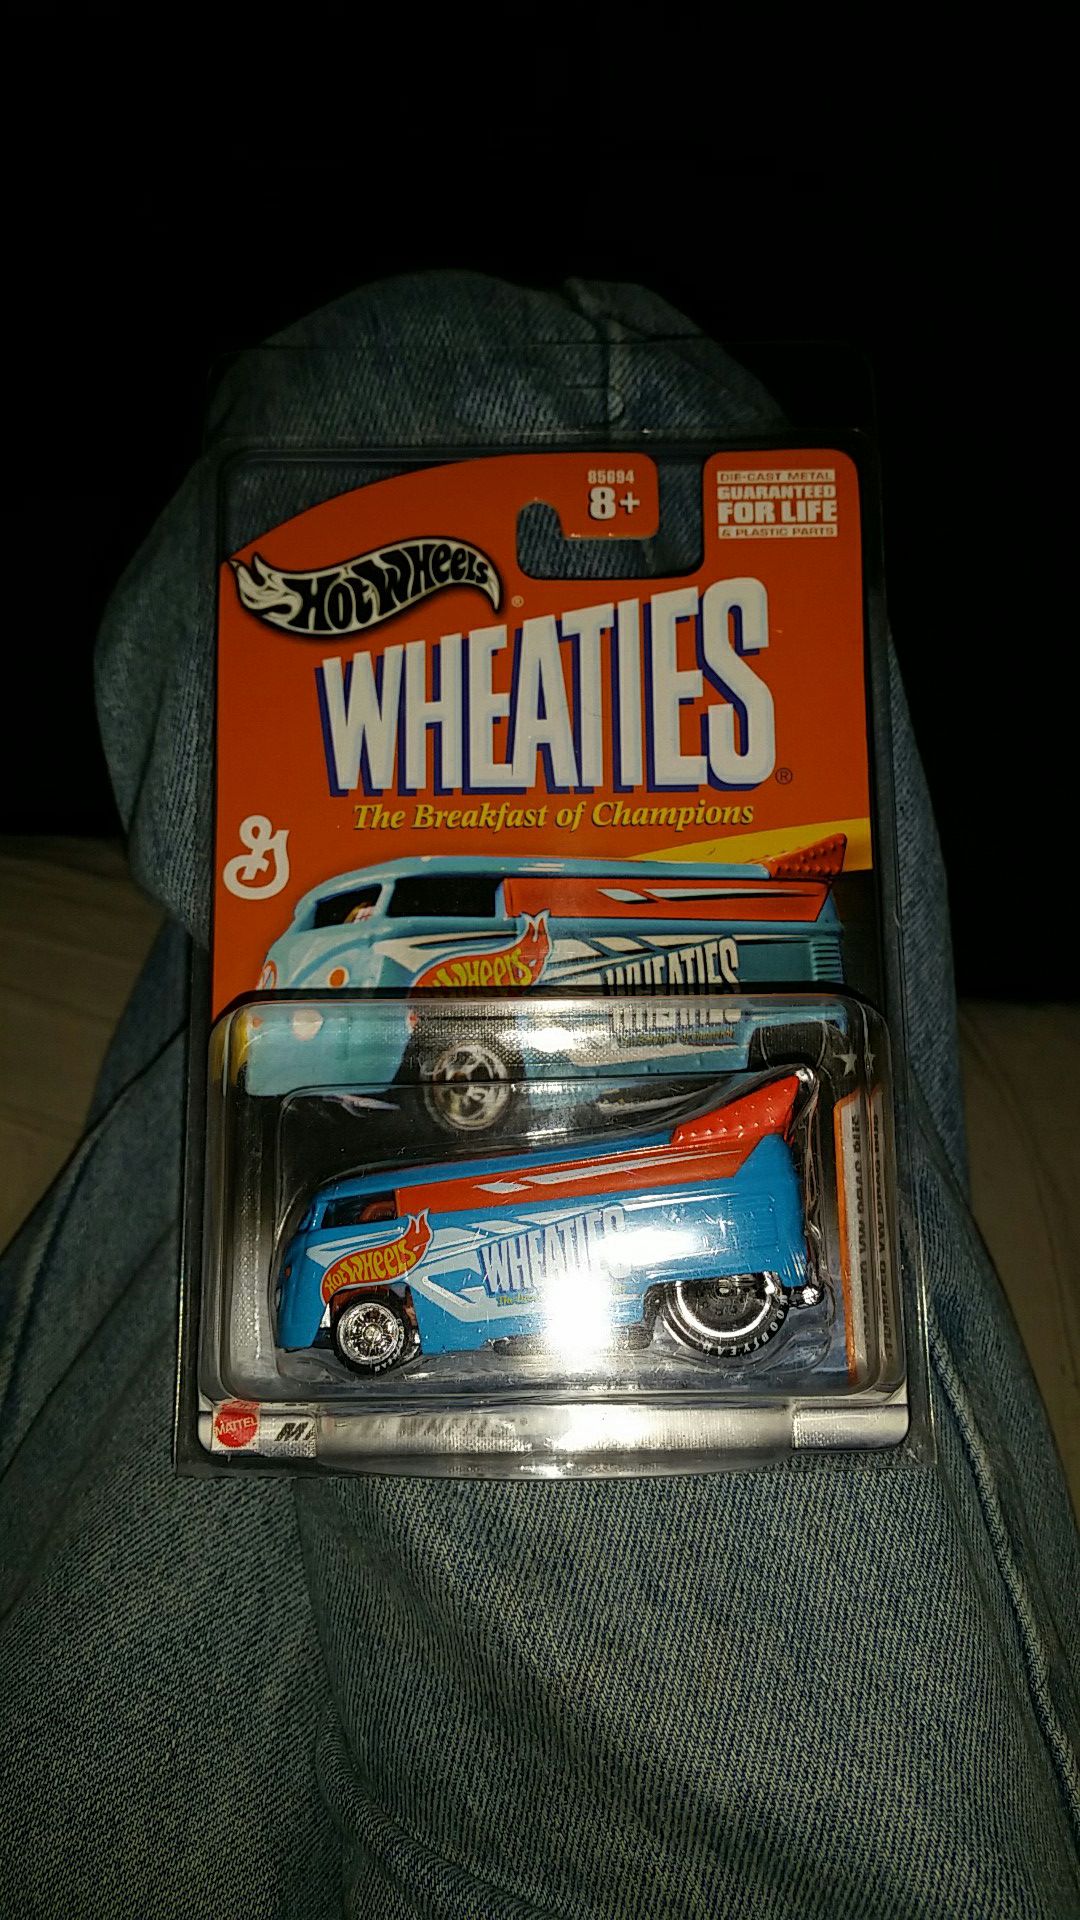 2003 Hot Wheels Wheaties VW Drag Bus - Limited Edition Premium in Protector case.